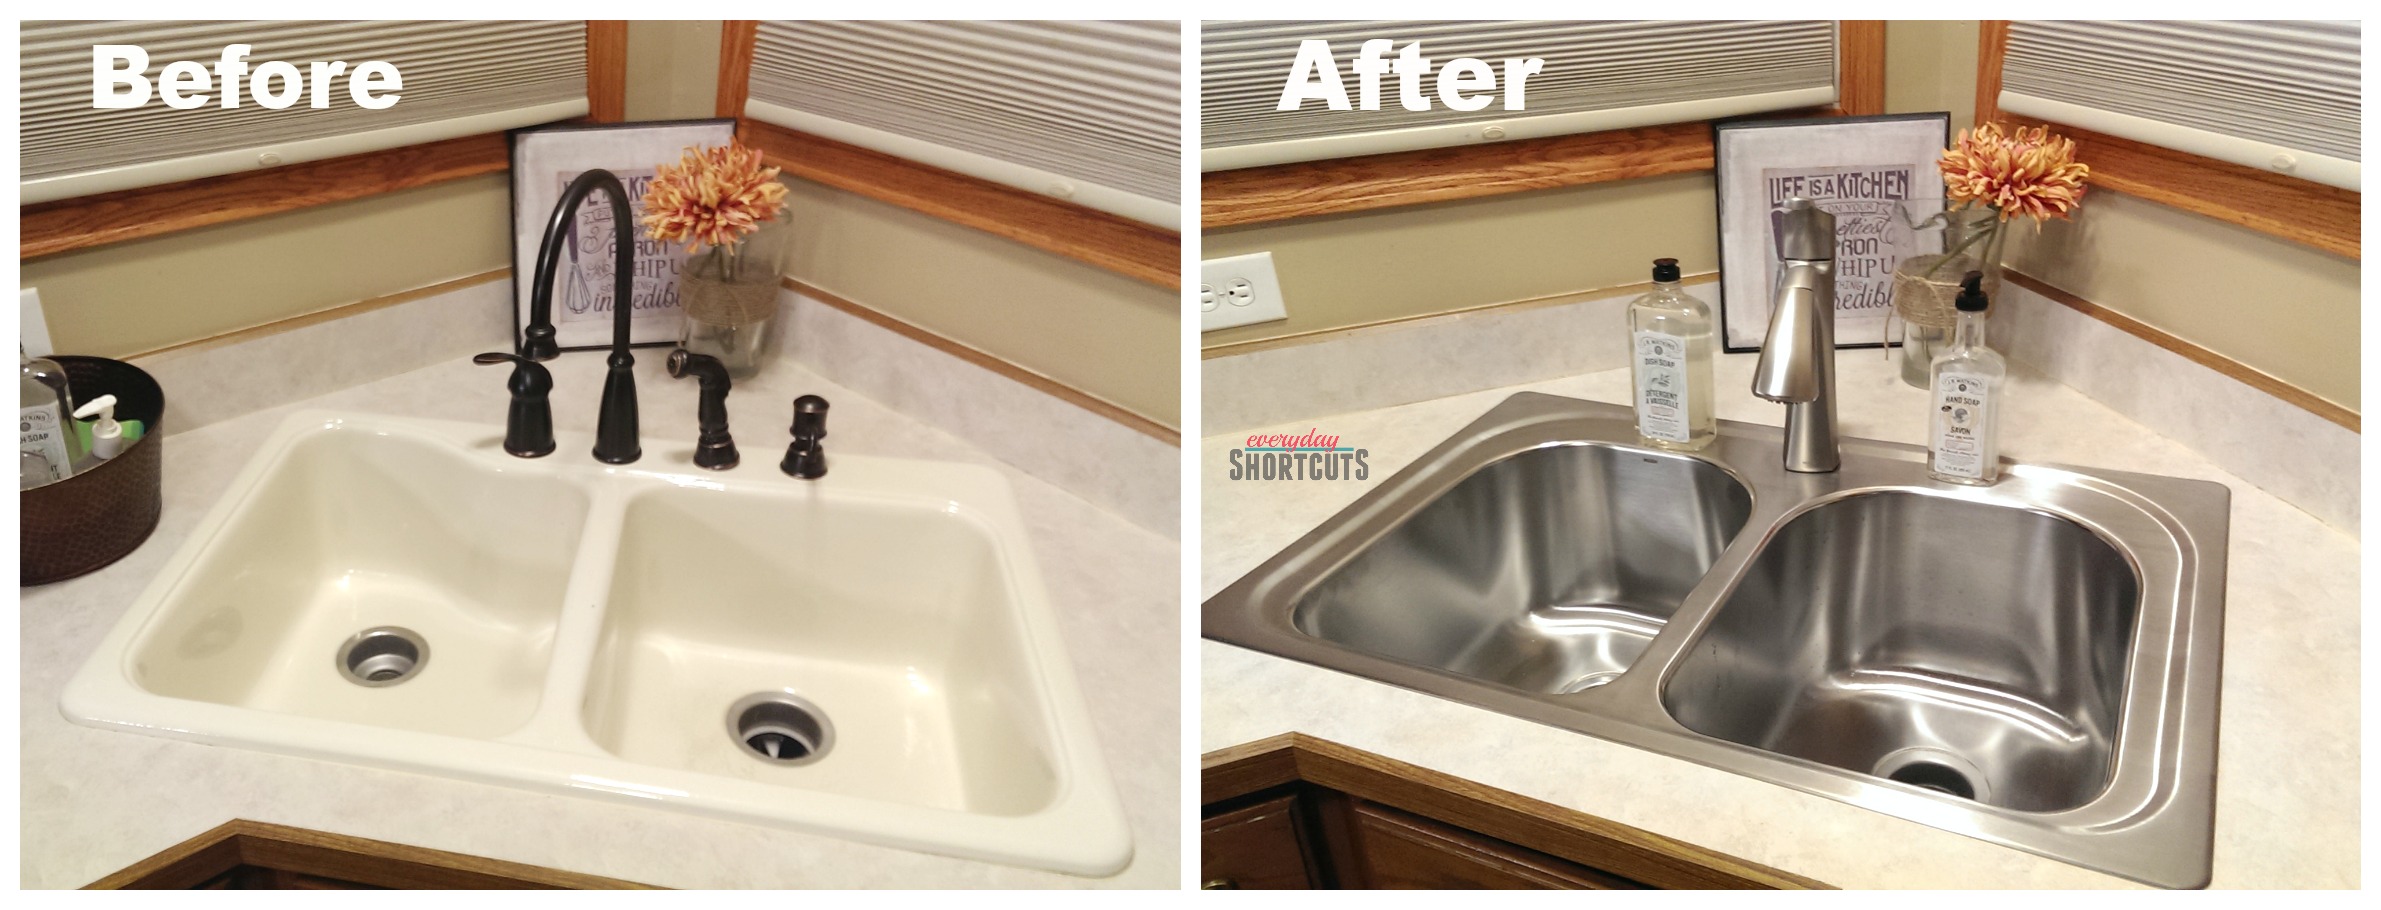 before and after kitchen sink